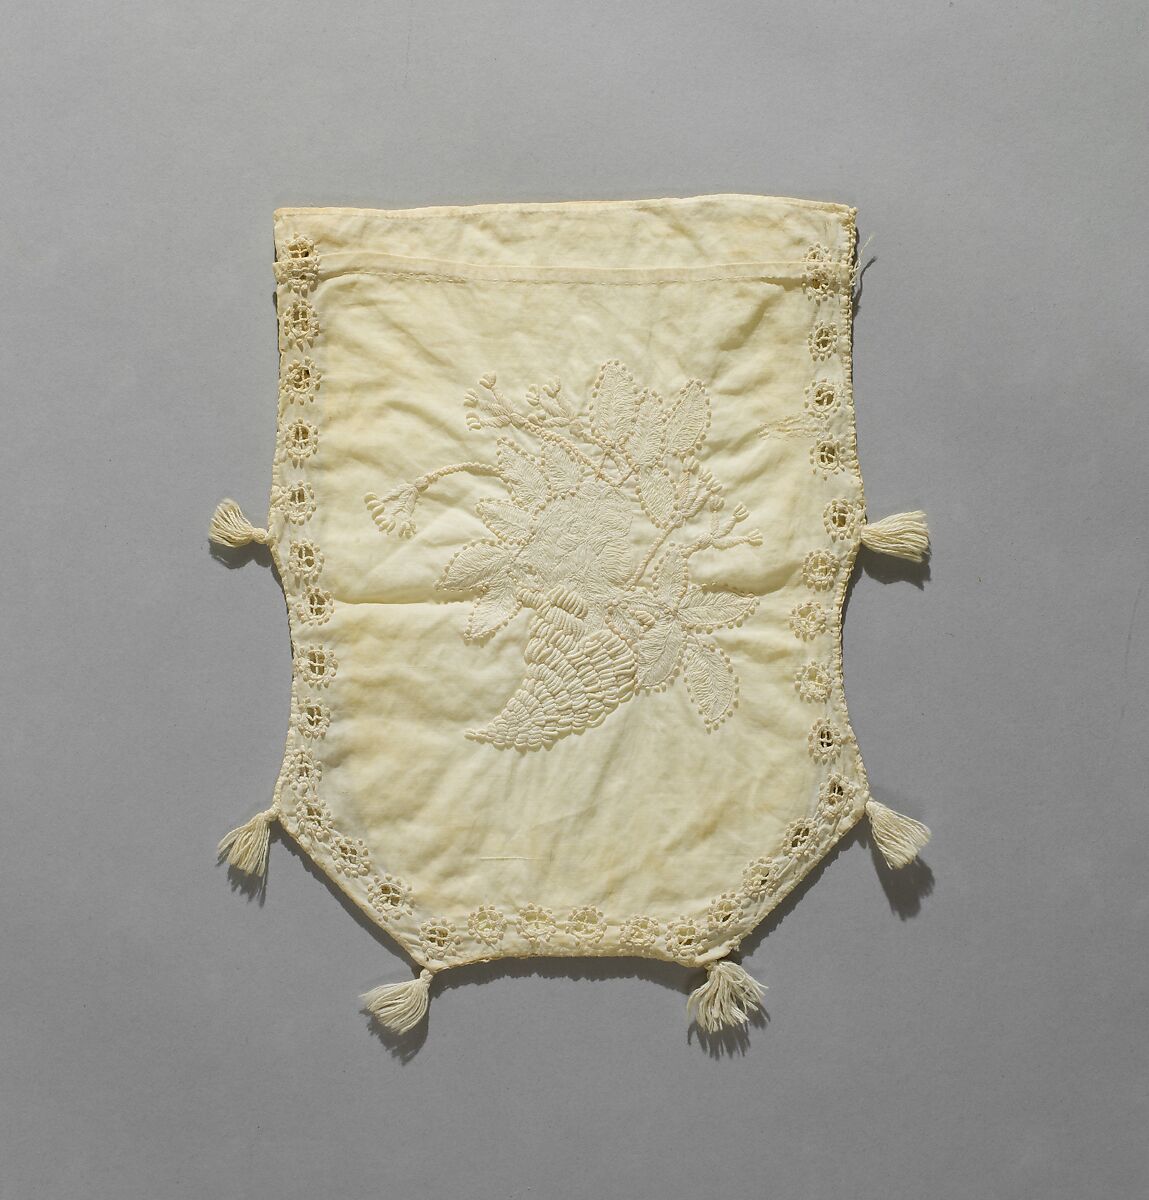 Embroidered Reticule, Martha Kittredge, New England, White cotton thread embroidered on white cotton fabric, American 